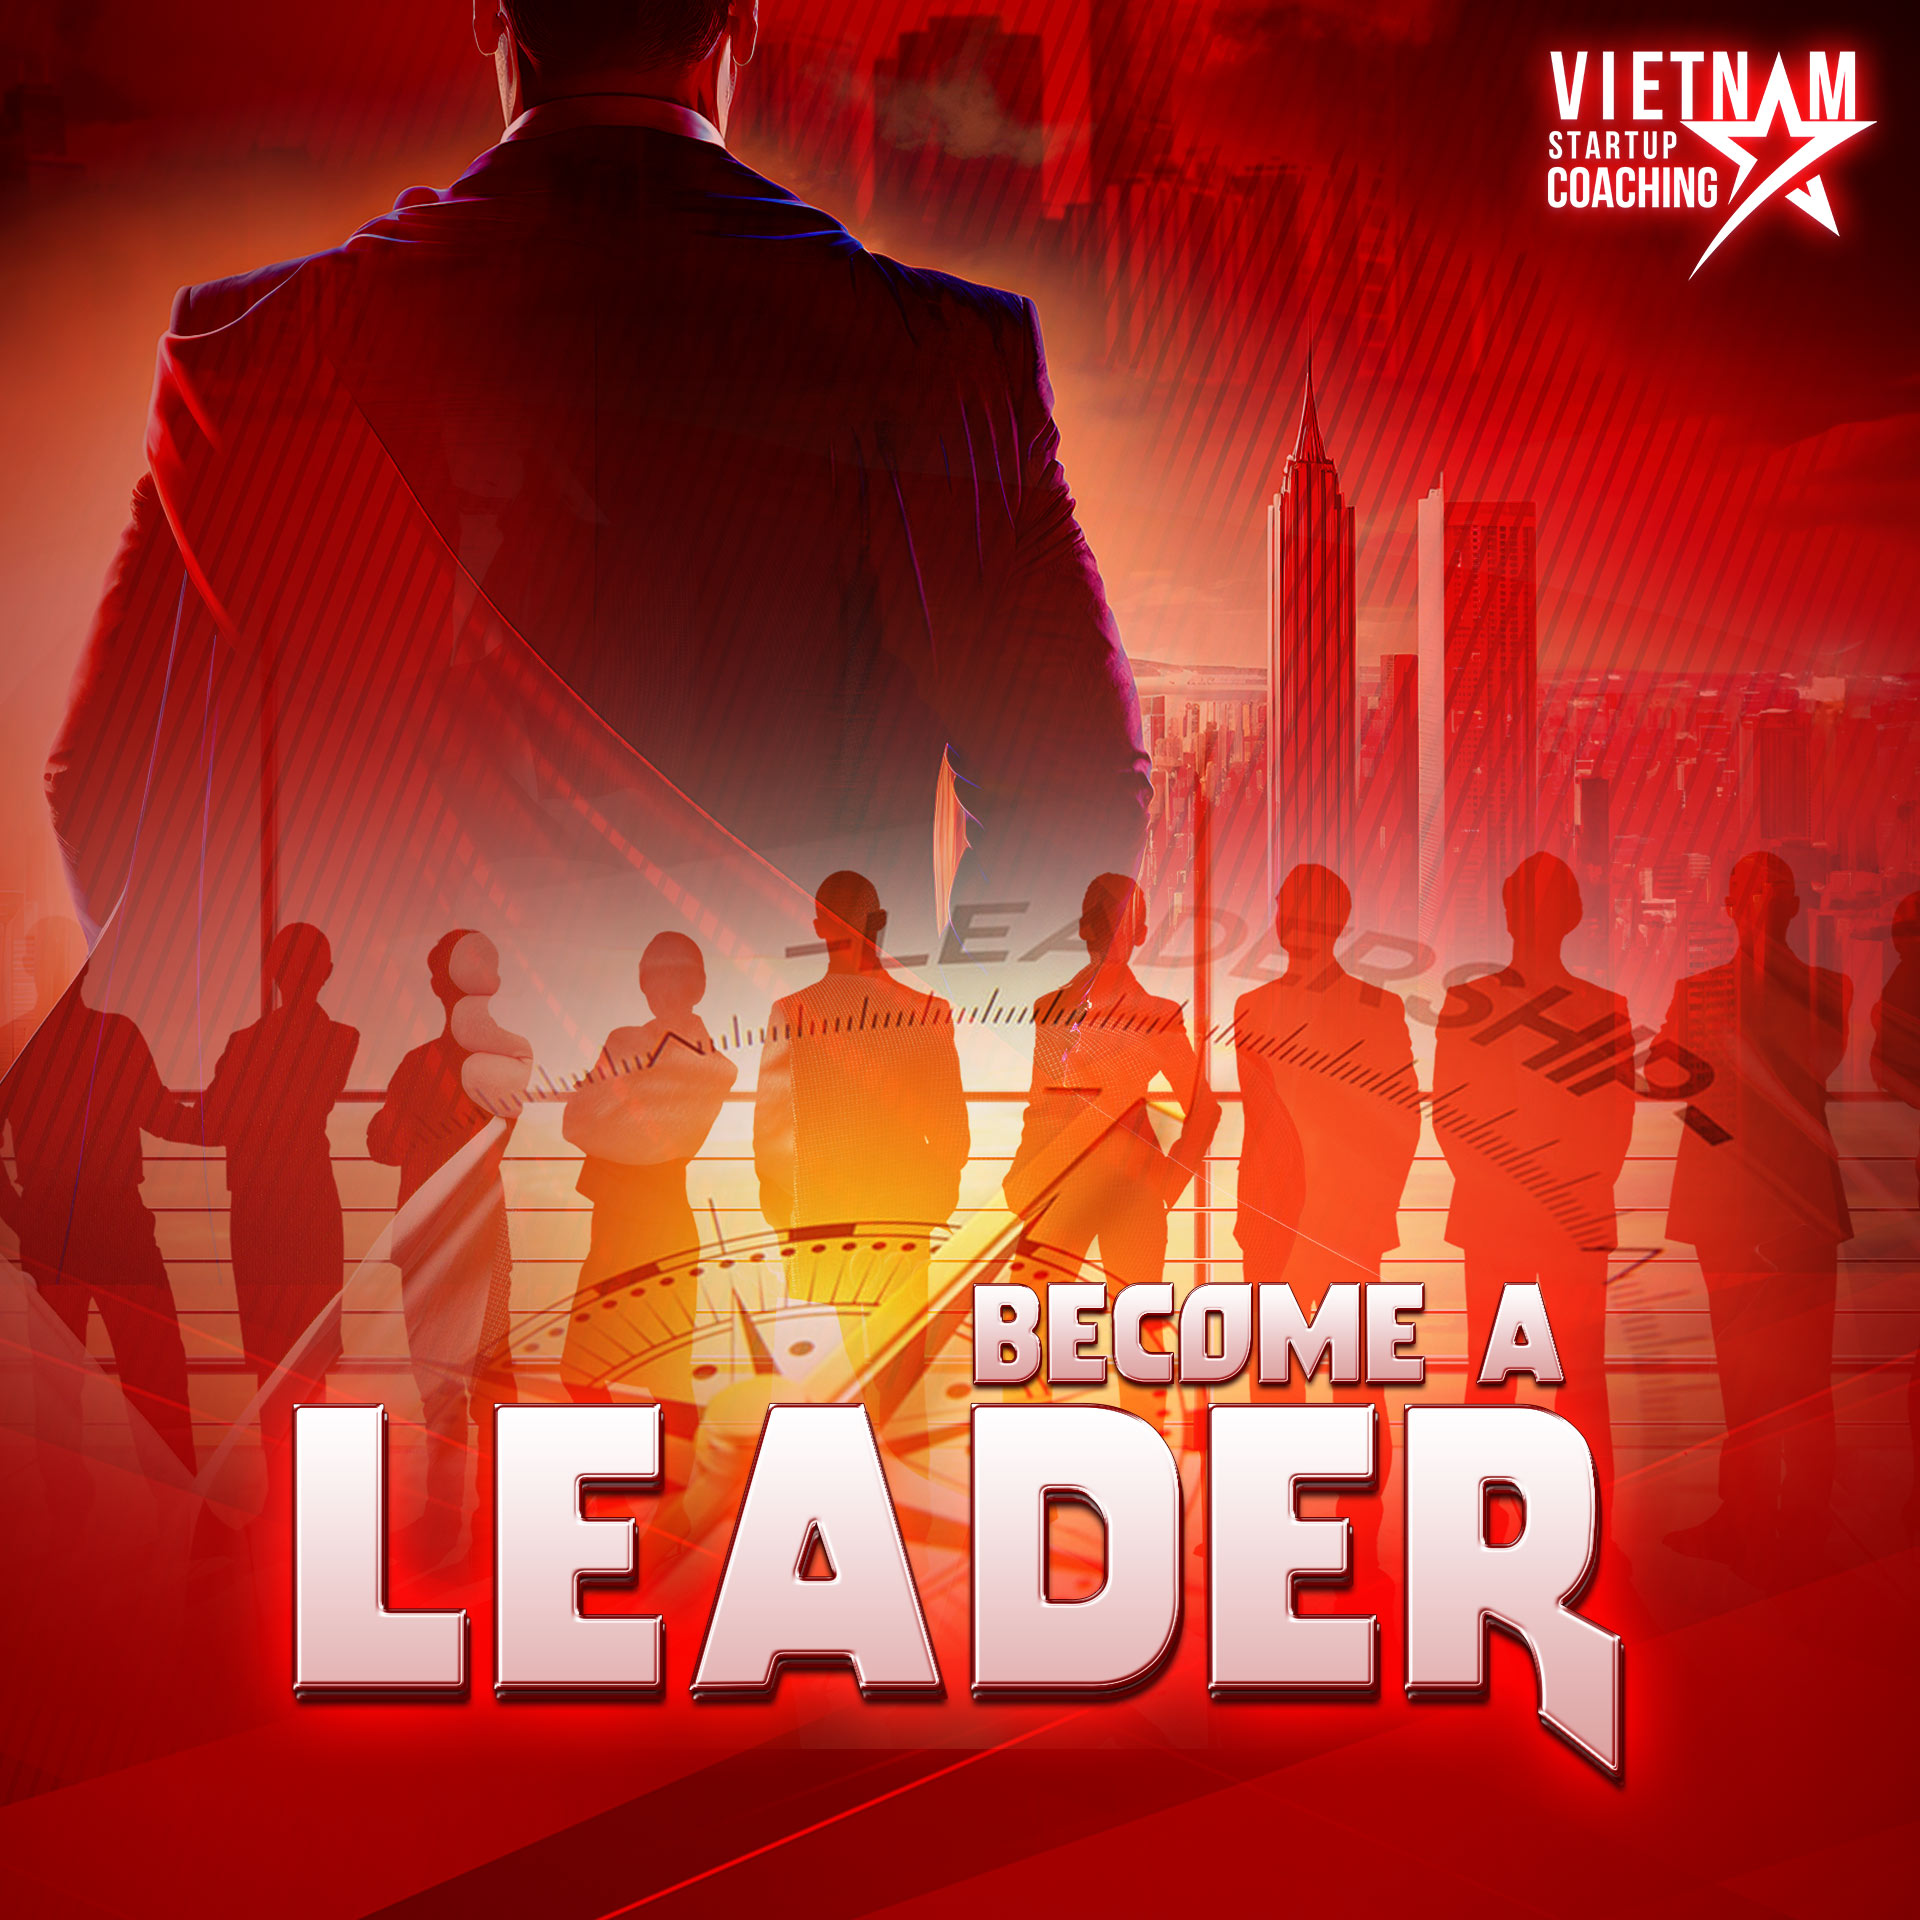 BECOME A LEADER